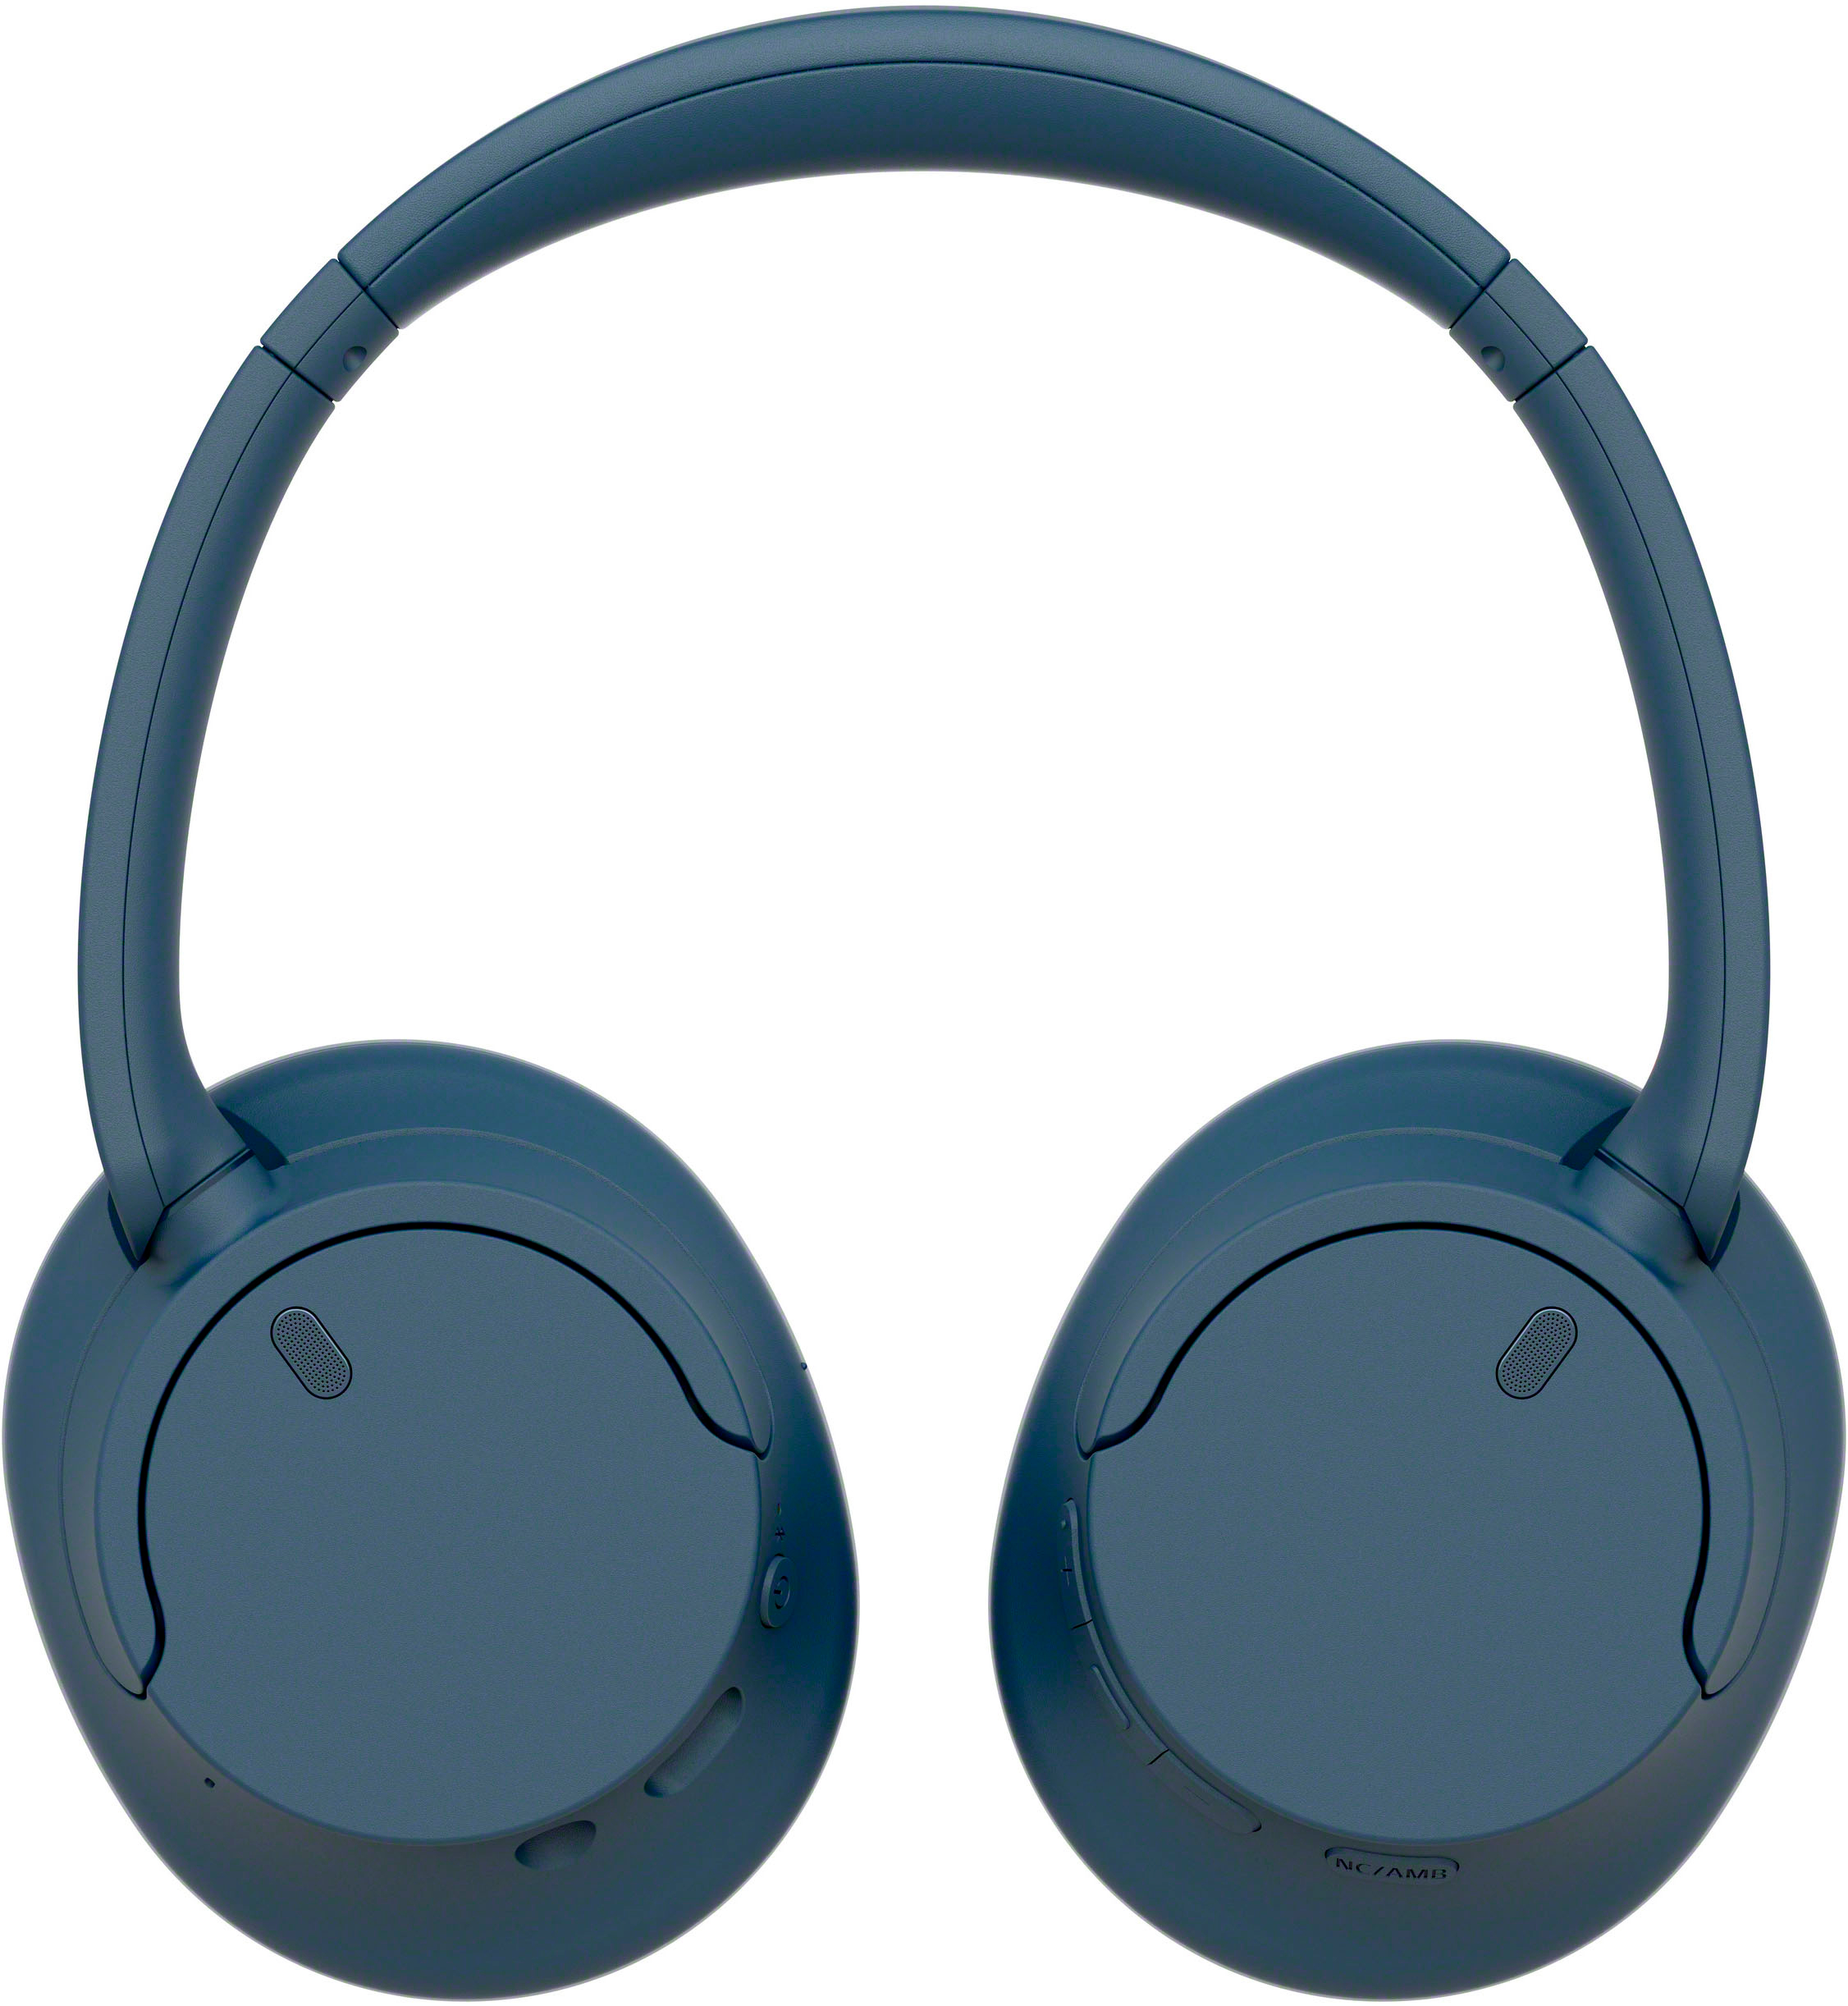 Buy WH-CH720N Wireless Noise Cancelling Headphones, Black, Sony Store  Online